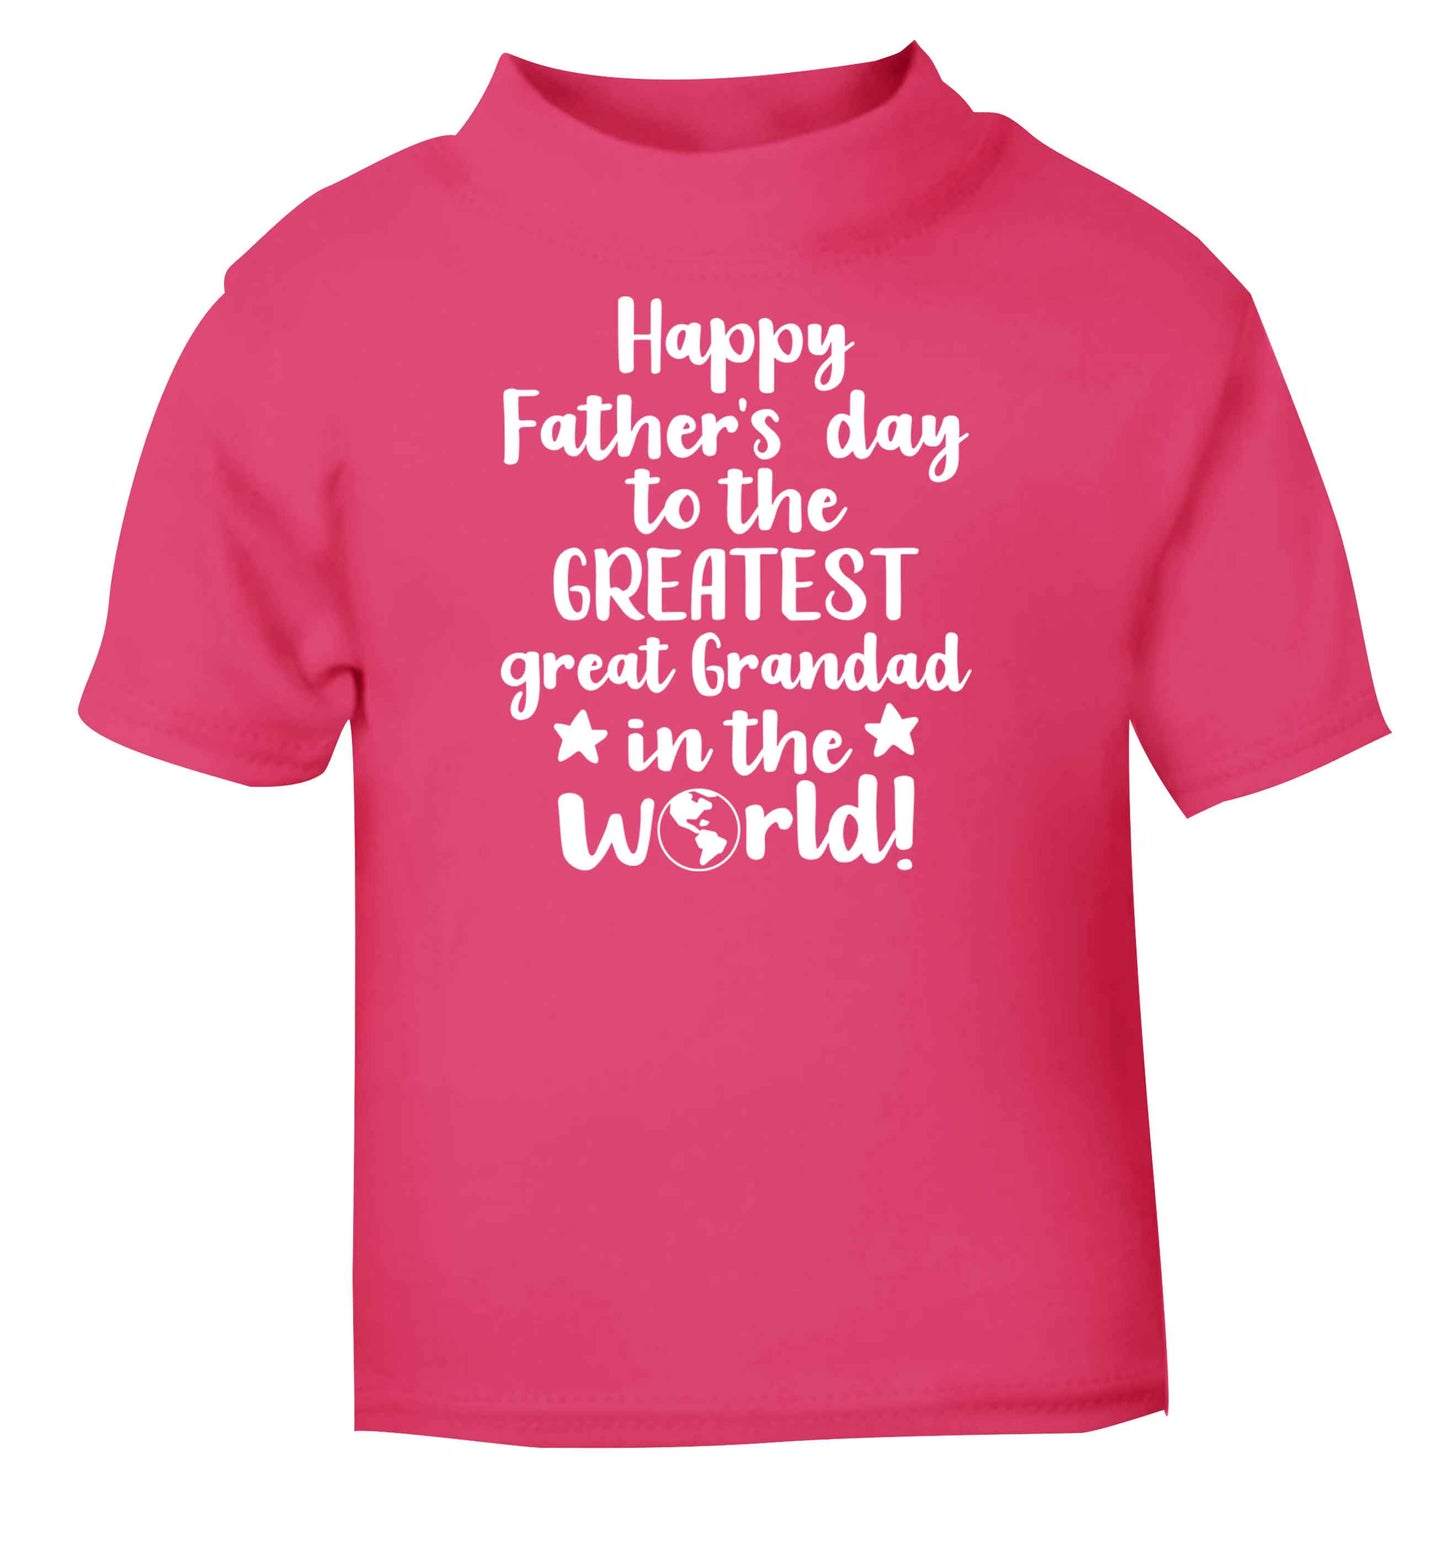 Happy Father's day to the greatest great grandad in the world pink baby toddler Tshirt 2 Years